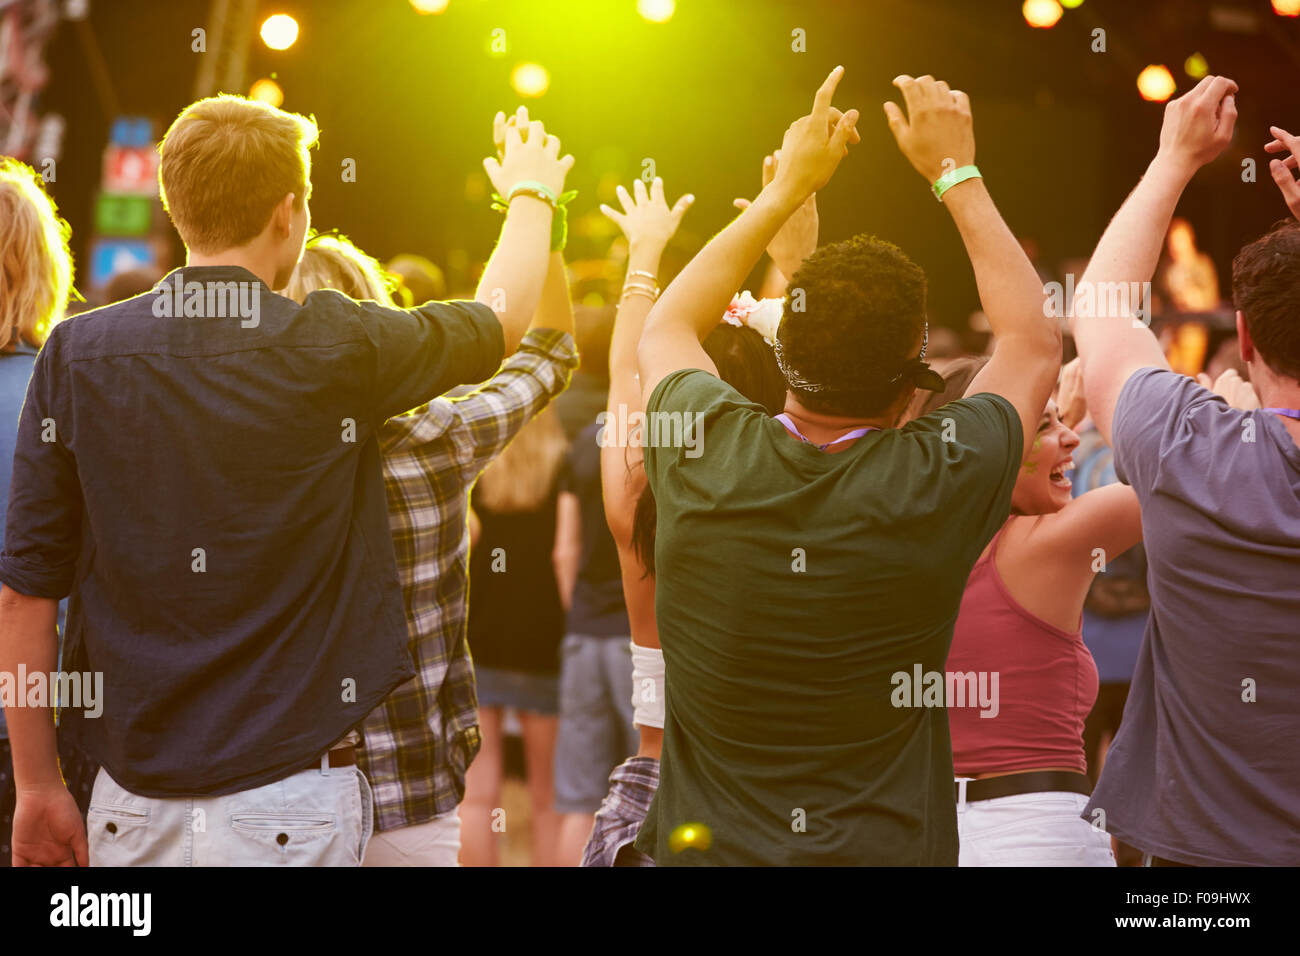 Back view of audience at a music festival Stock Photo